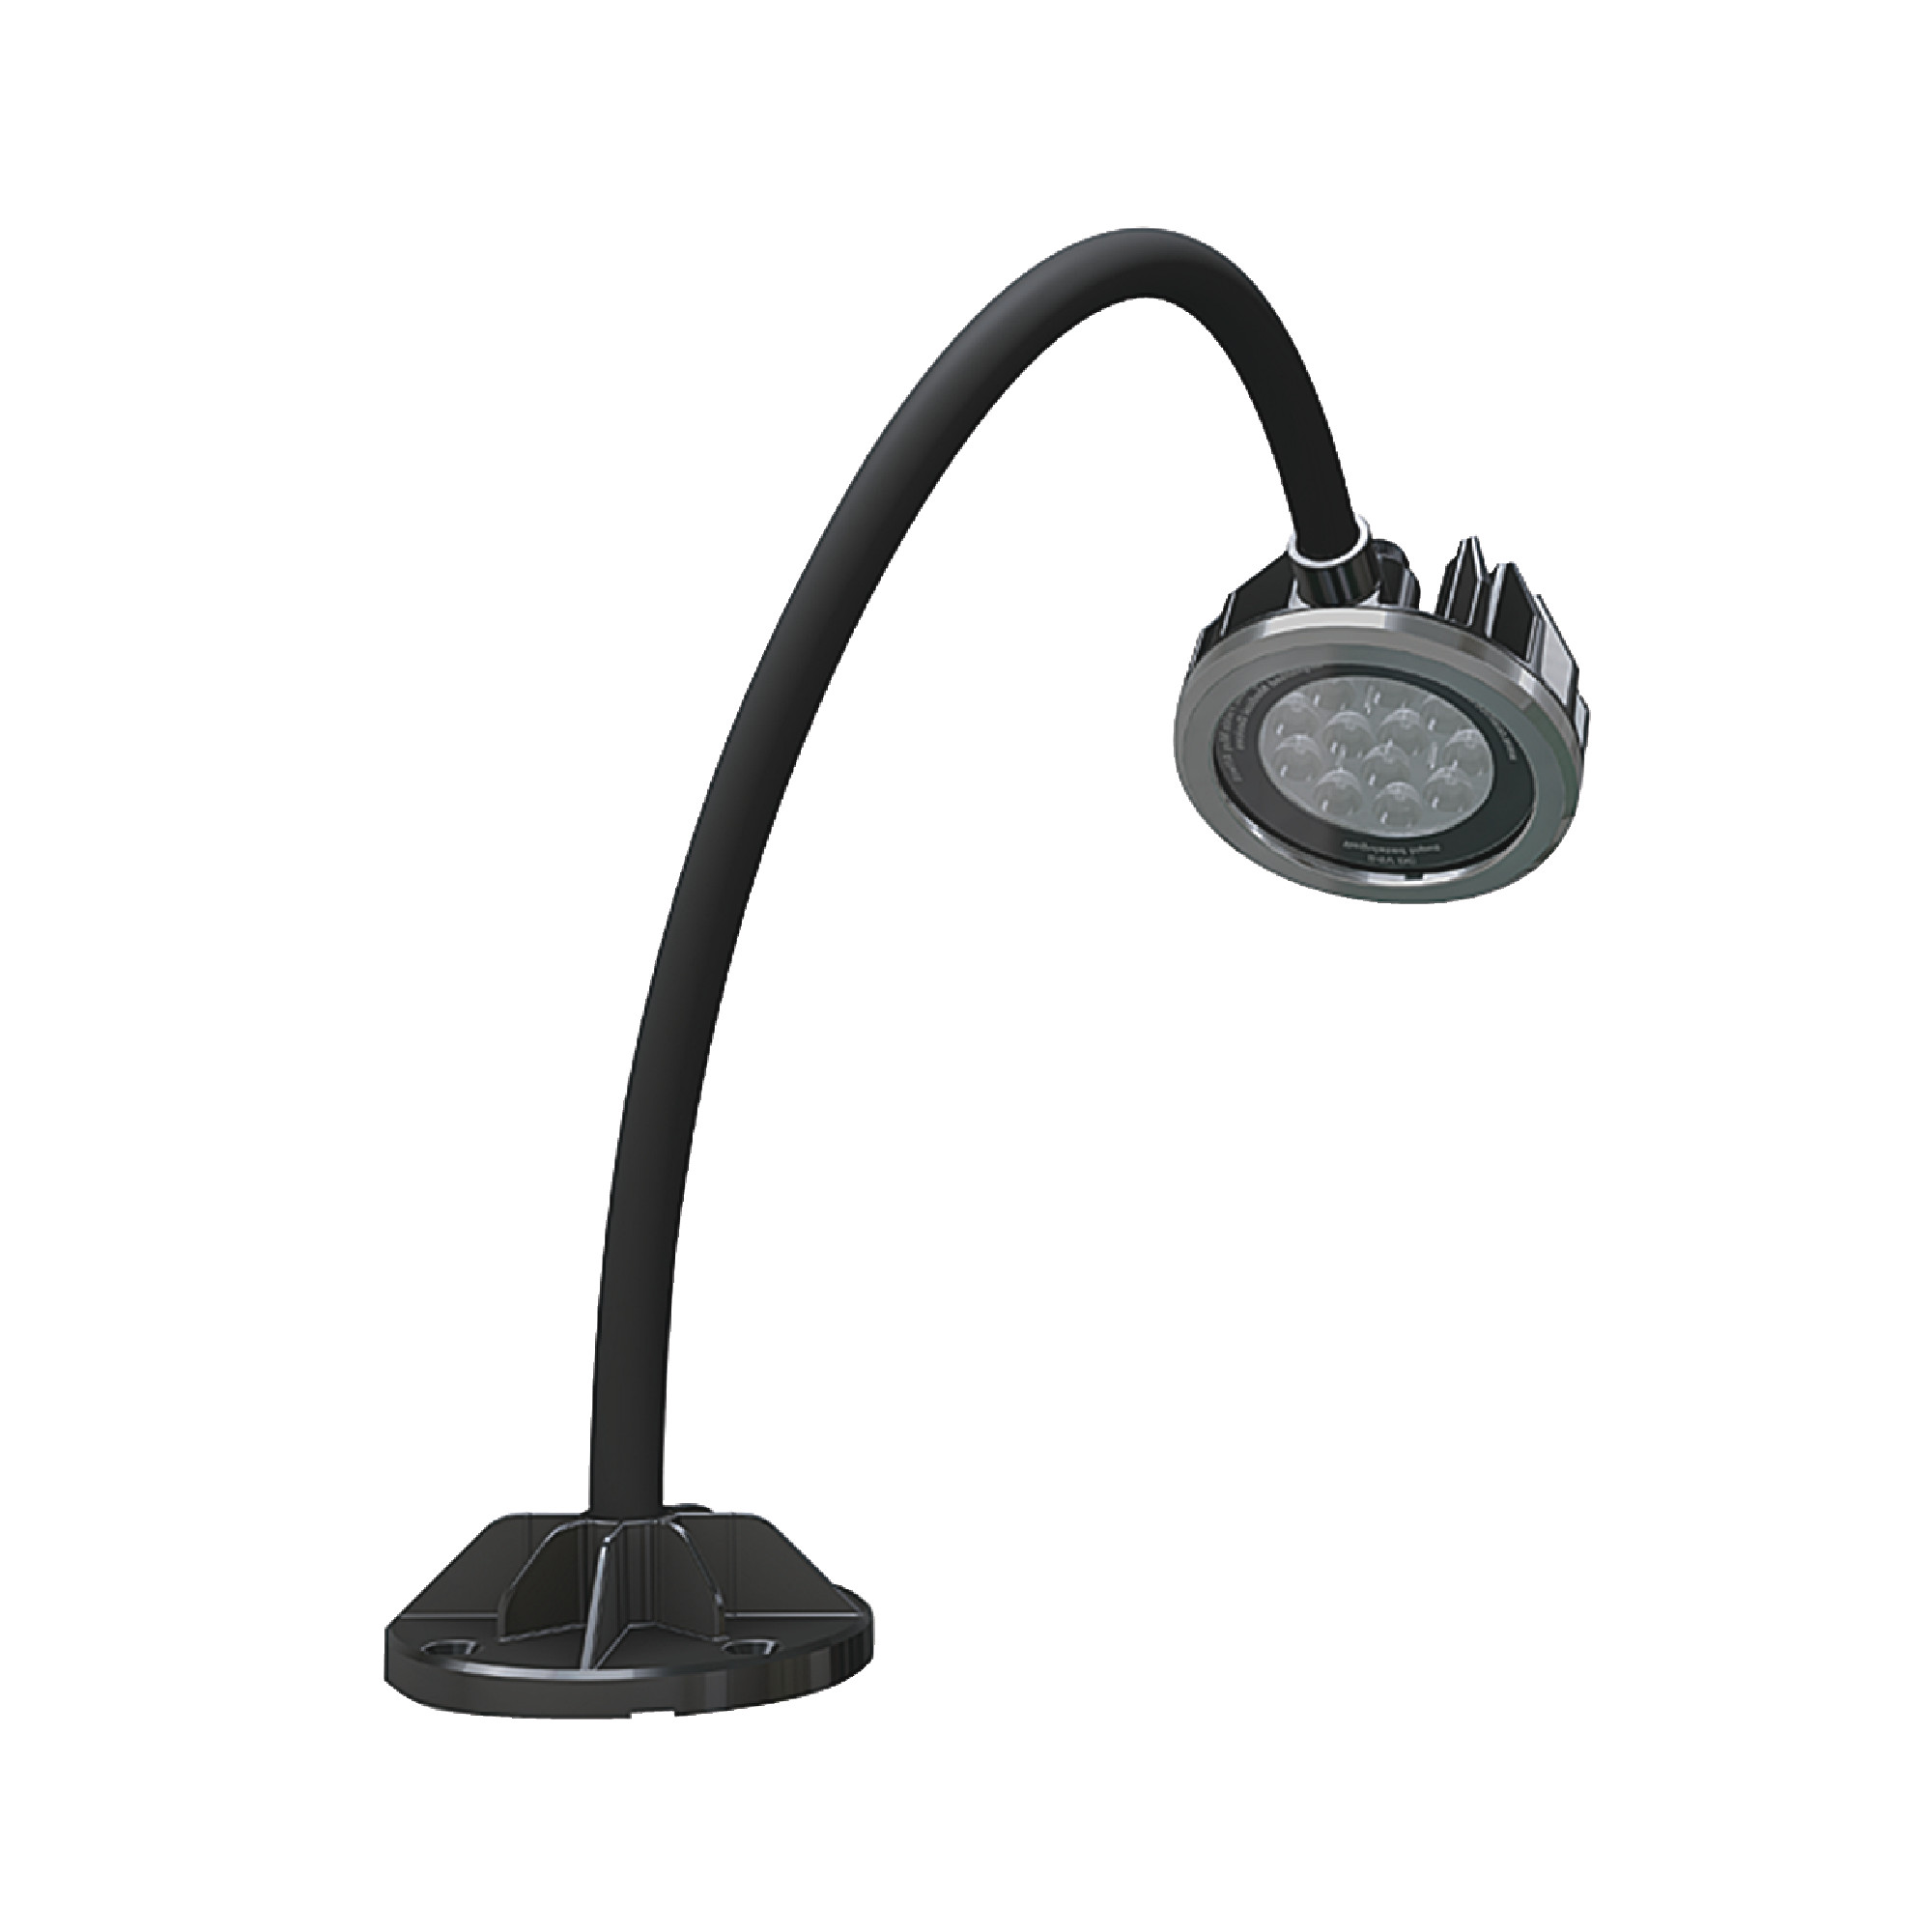 LED Machine Spotlight-18" Gooseneck Adjustable Screw Mount or Magnet with Built-in Dimming Switch